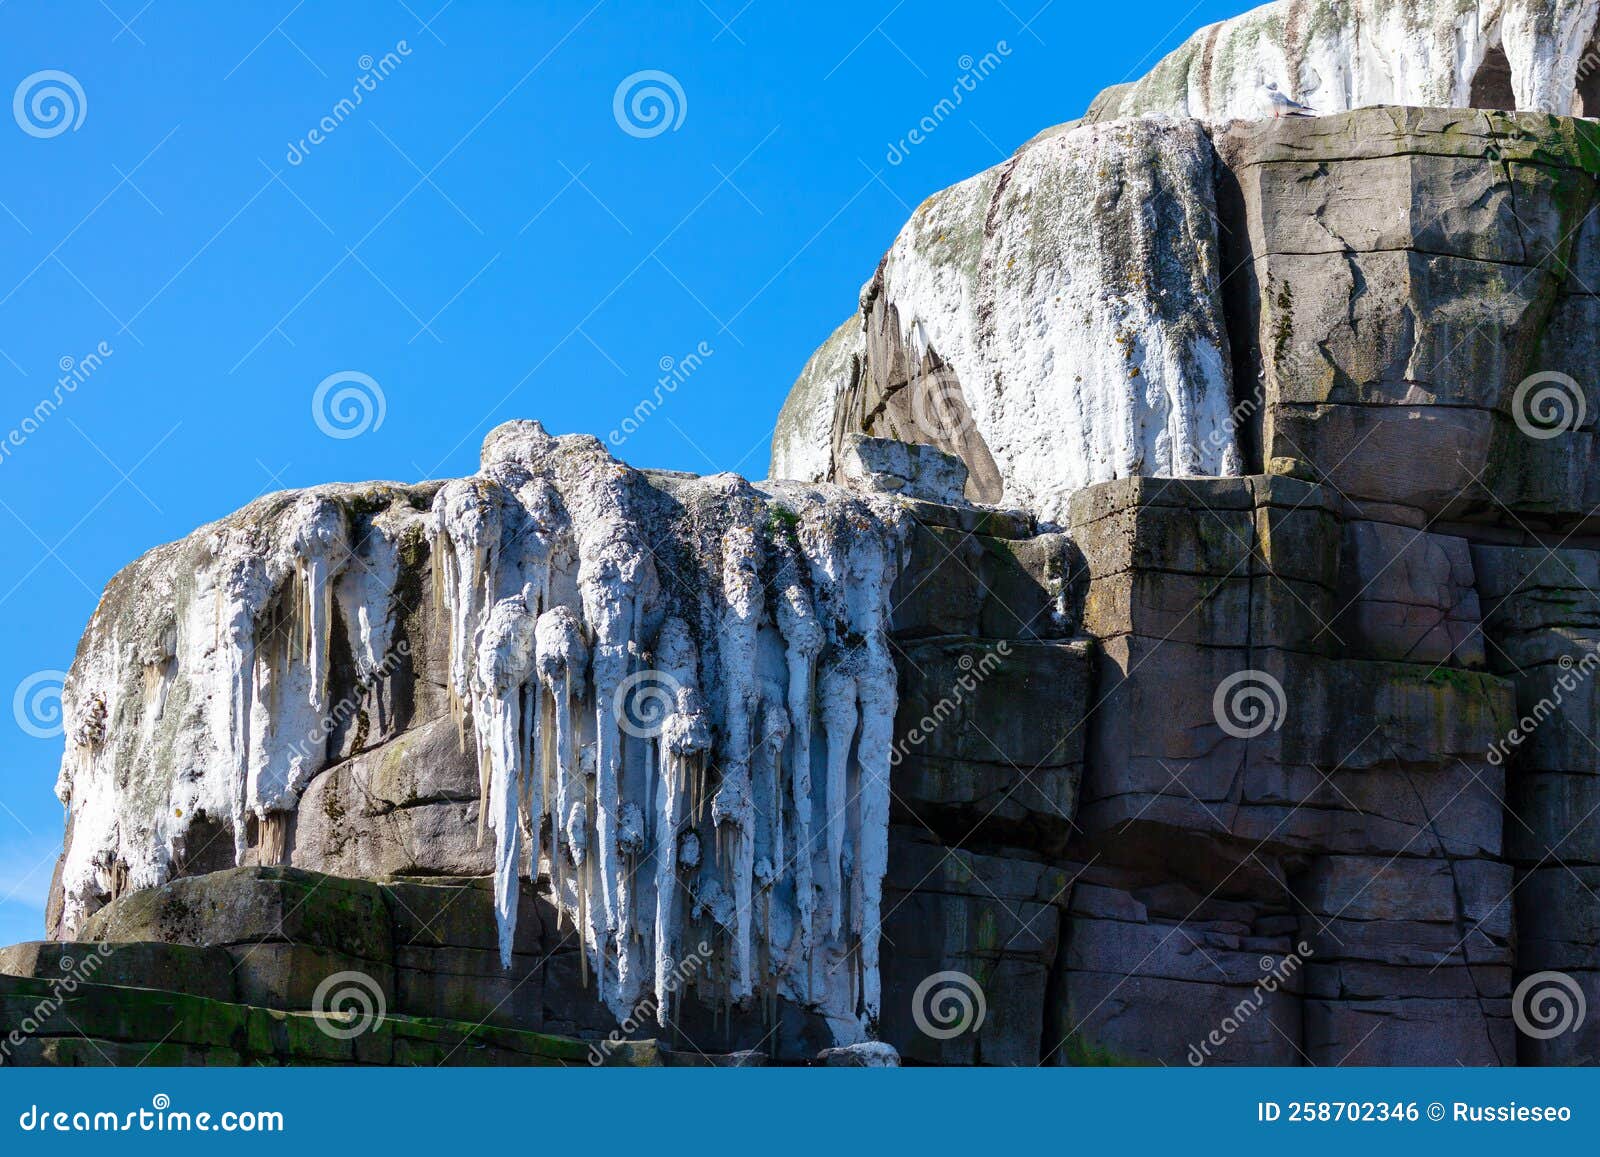 icicles on top of a mountain